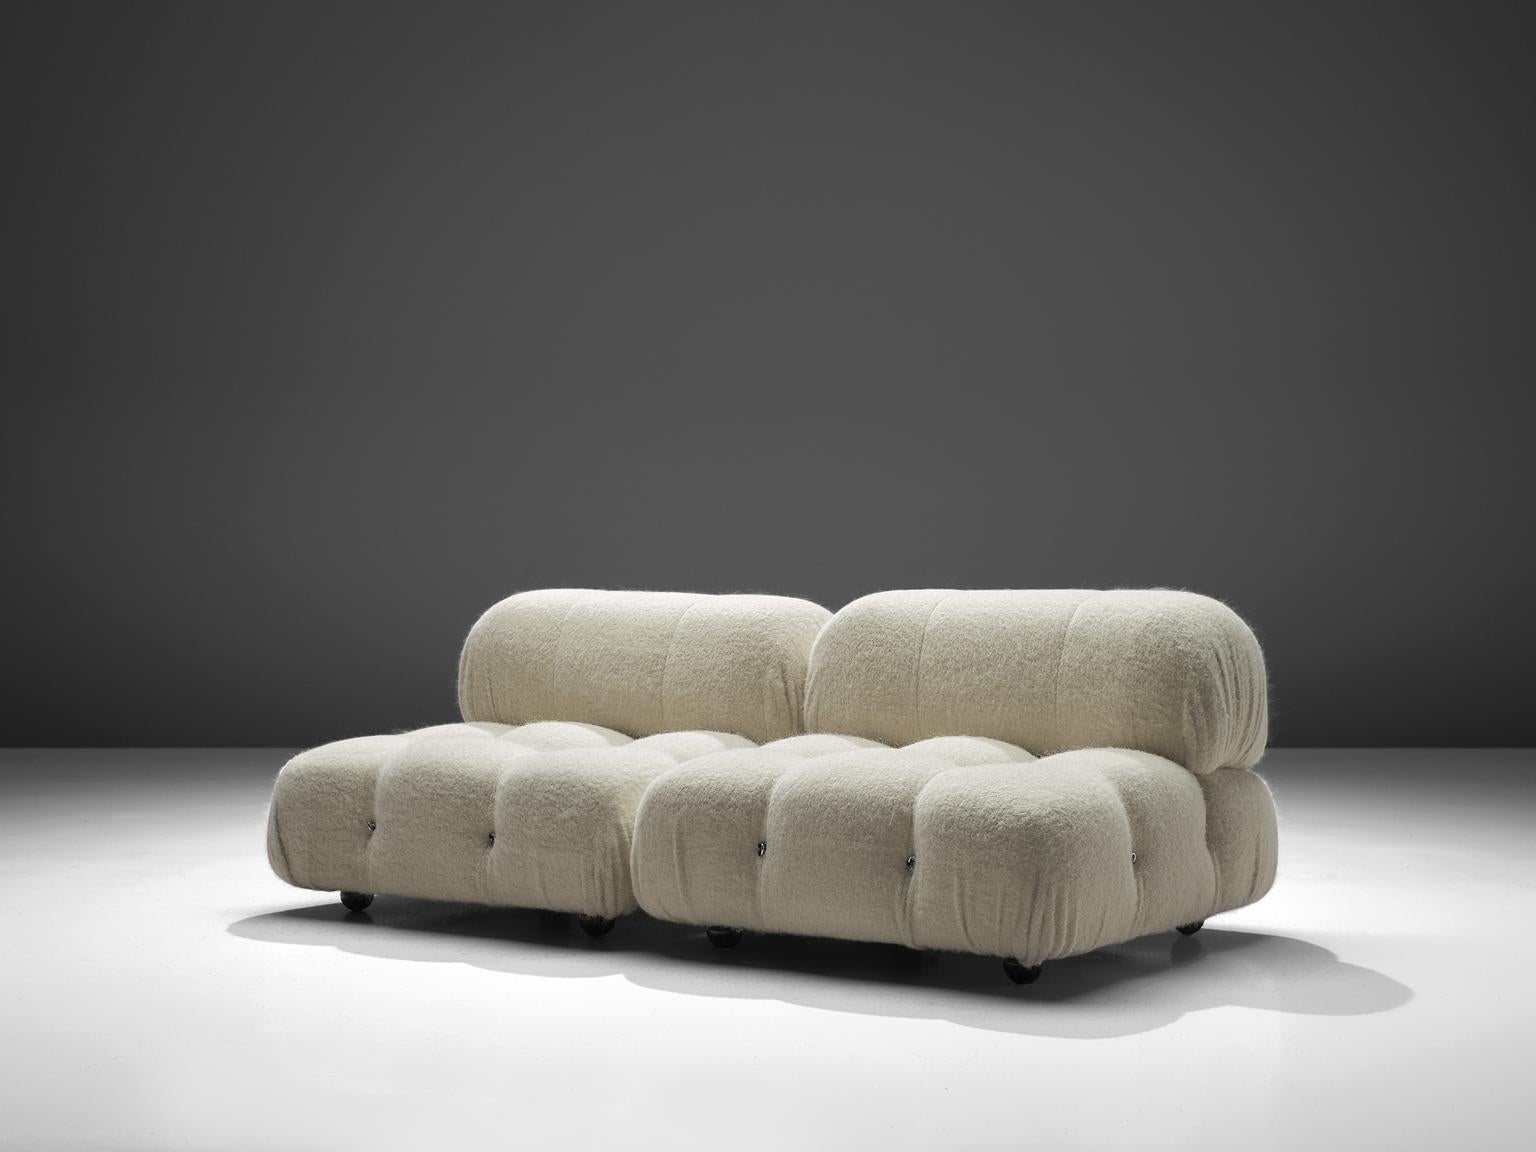 Mario Bellini, 'Camaleonda' sofa, in white Pierre Frey wool-mix upholstery, Italy, 1972.

These sofa elementen are made on request in our upholstery atelier and consists of two large elements and two back rests. The sectional elements this sofa